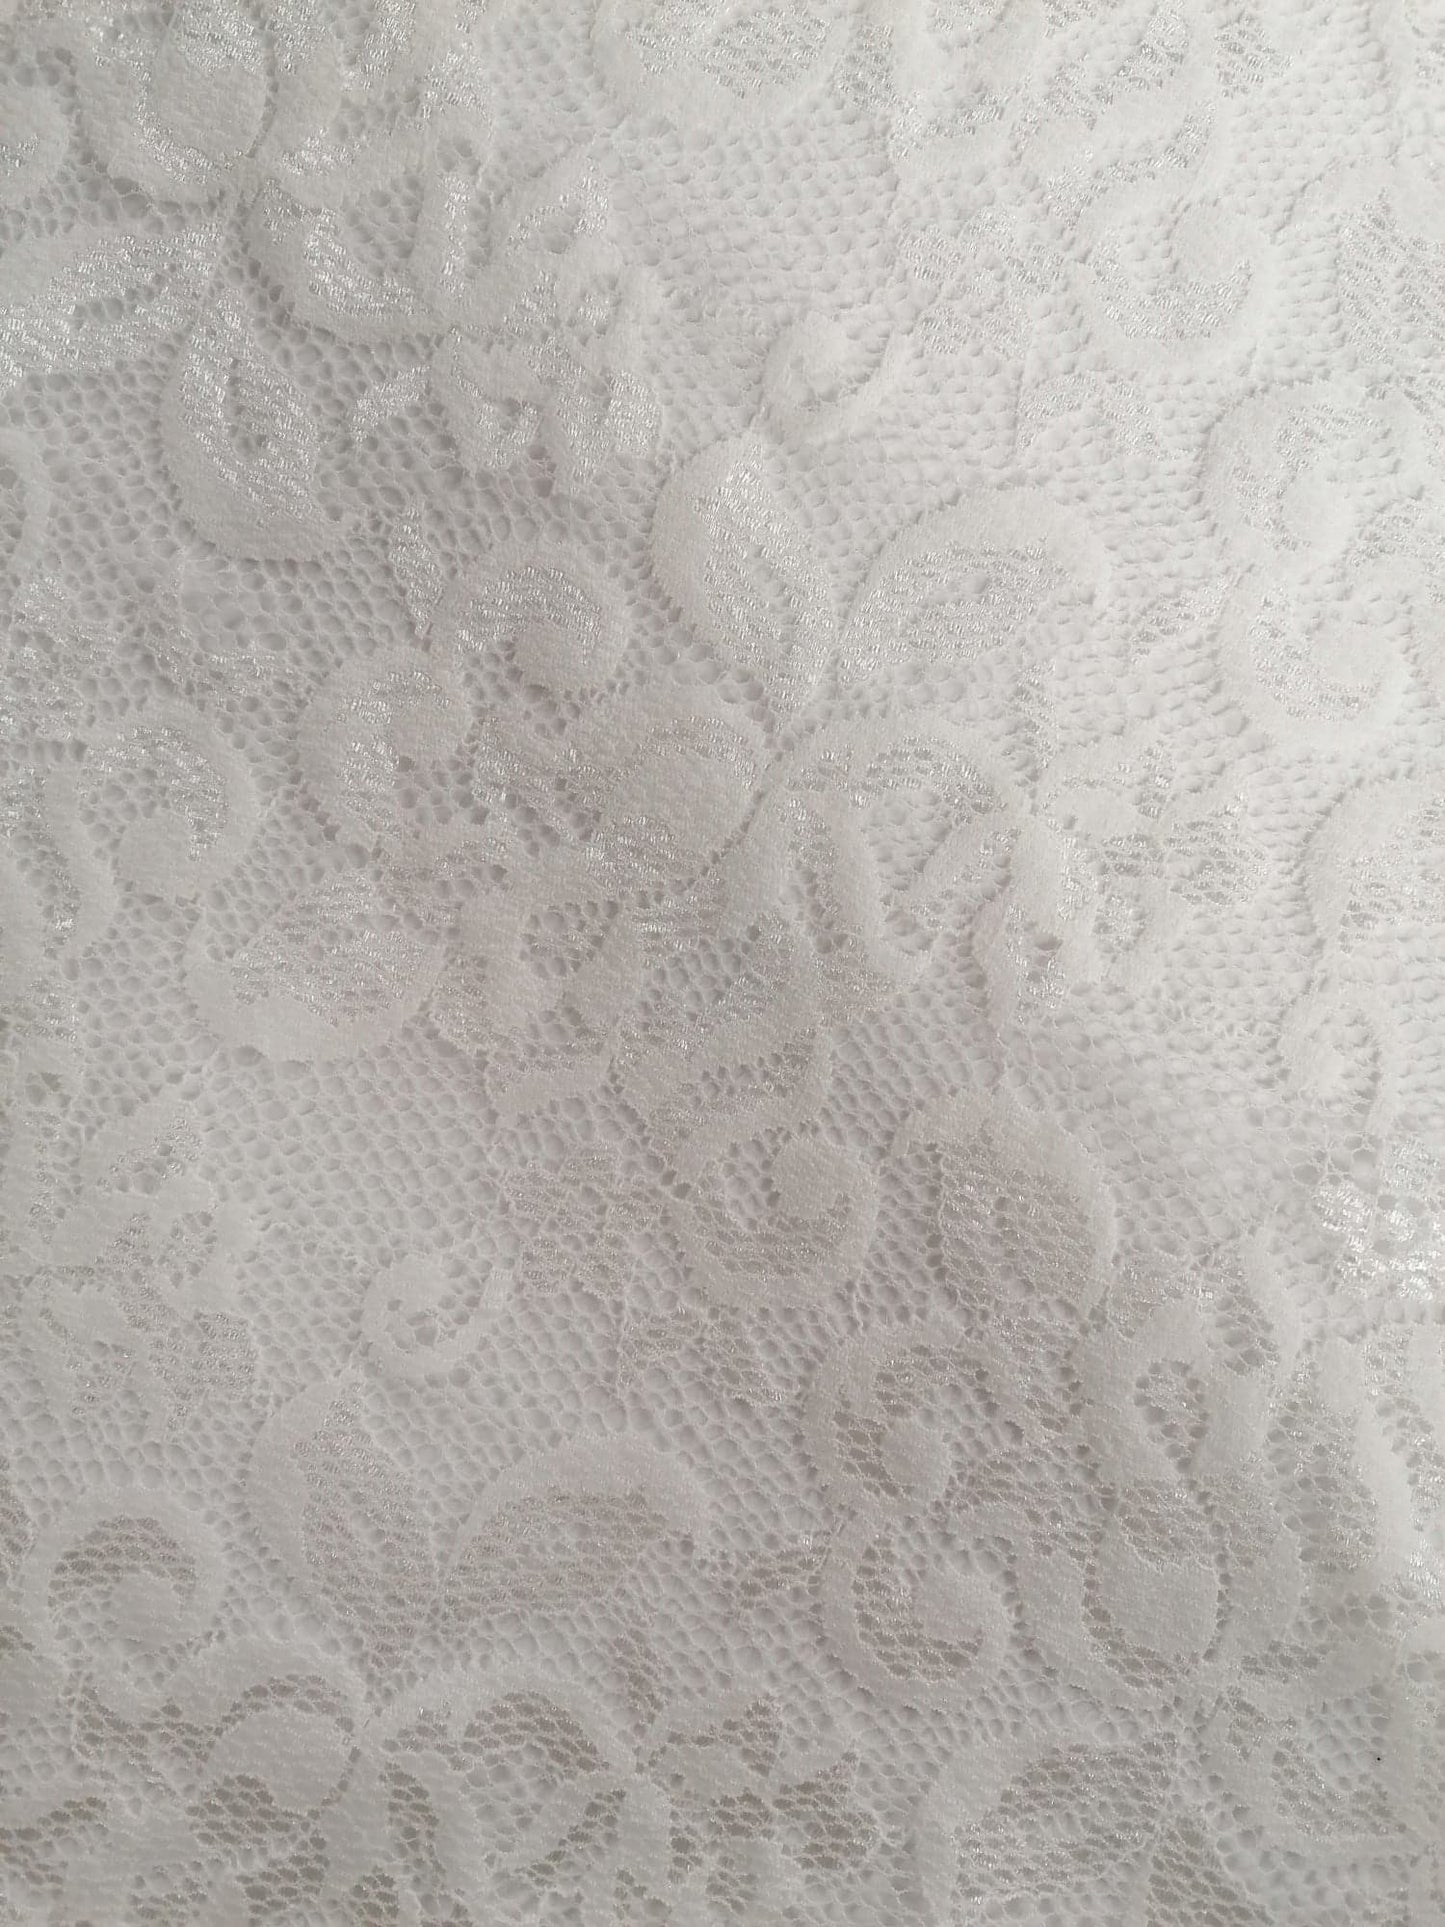 Double Scalloped Lace - Cream - 58" Wide - Sold By the Metre